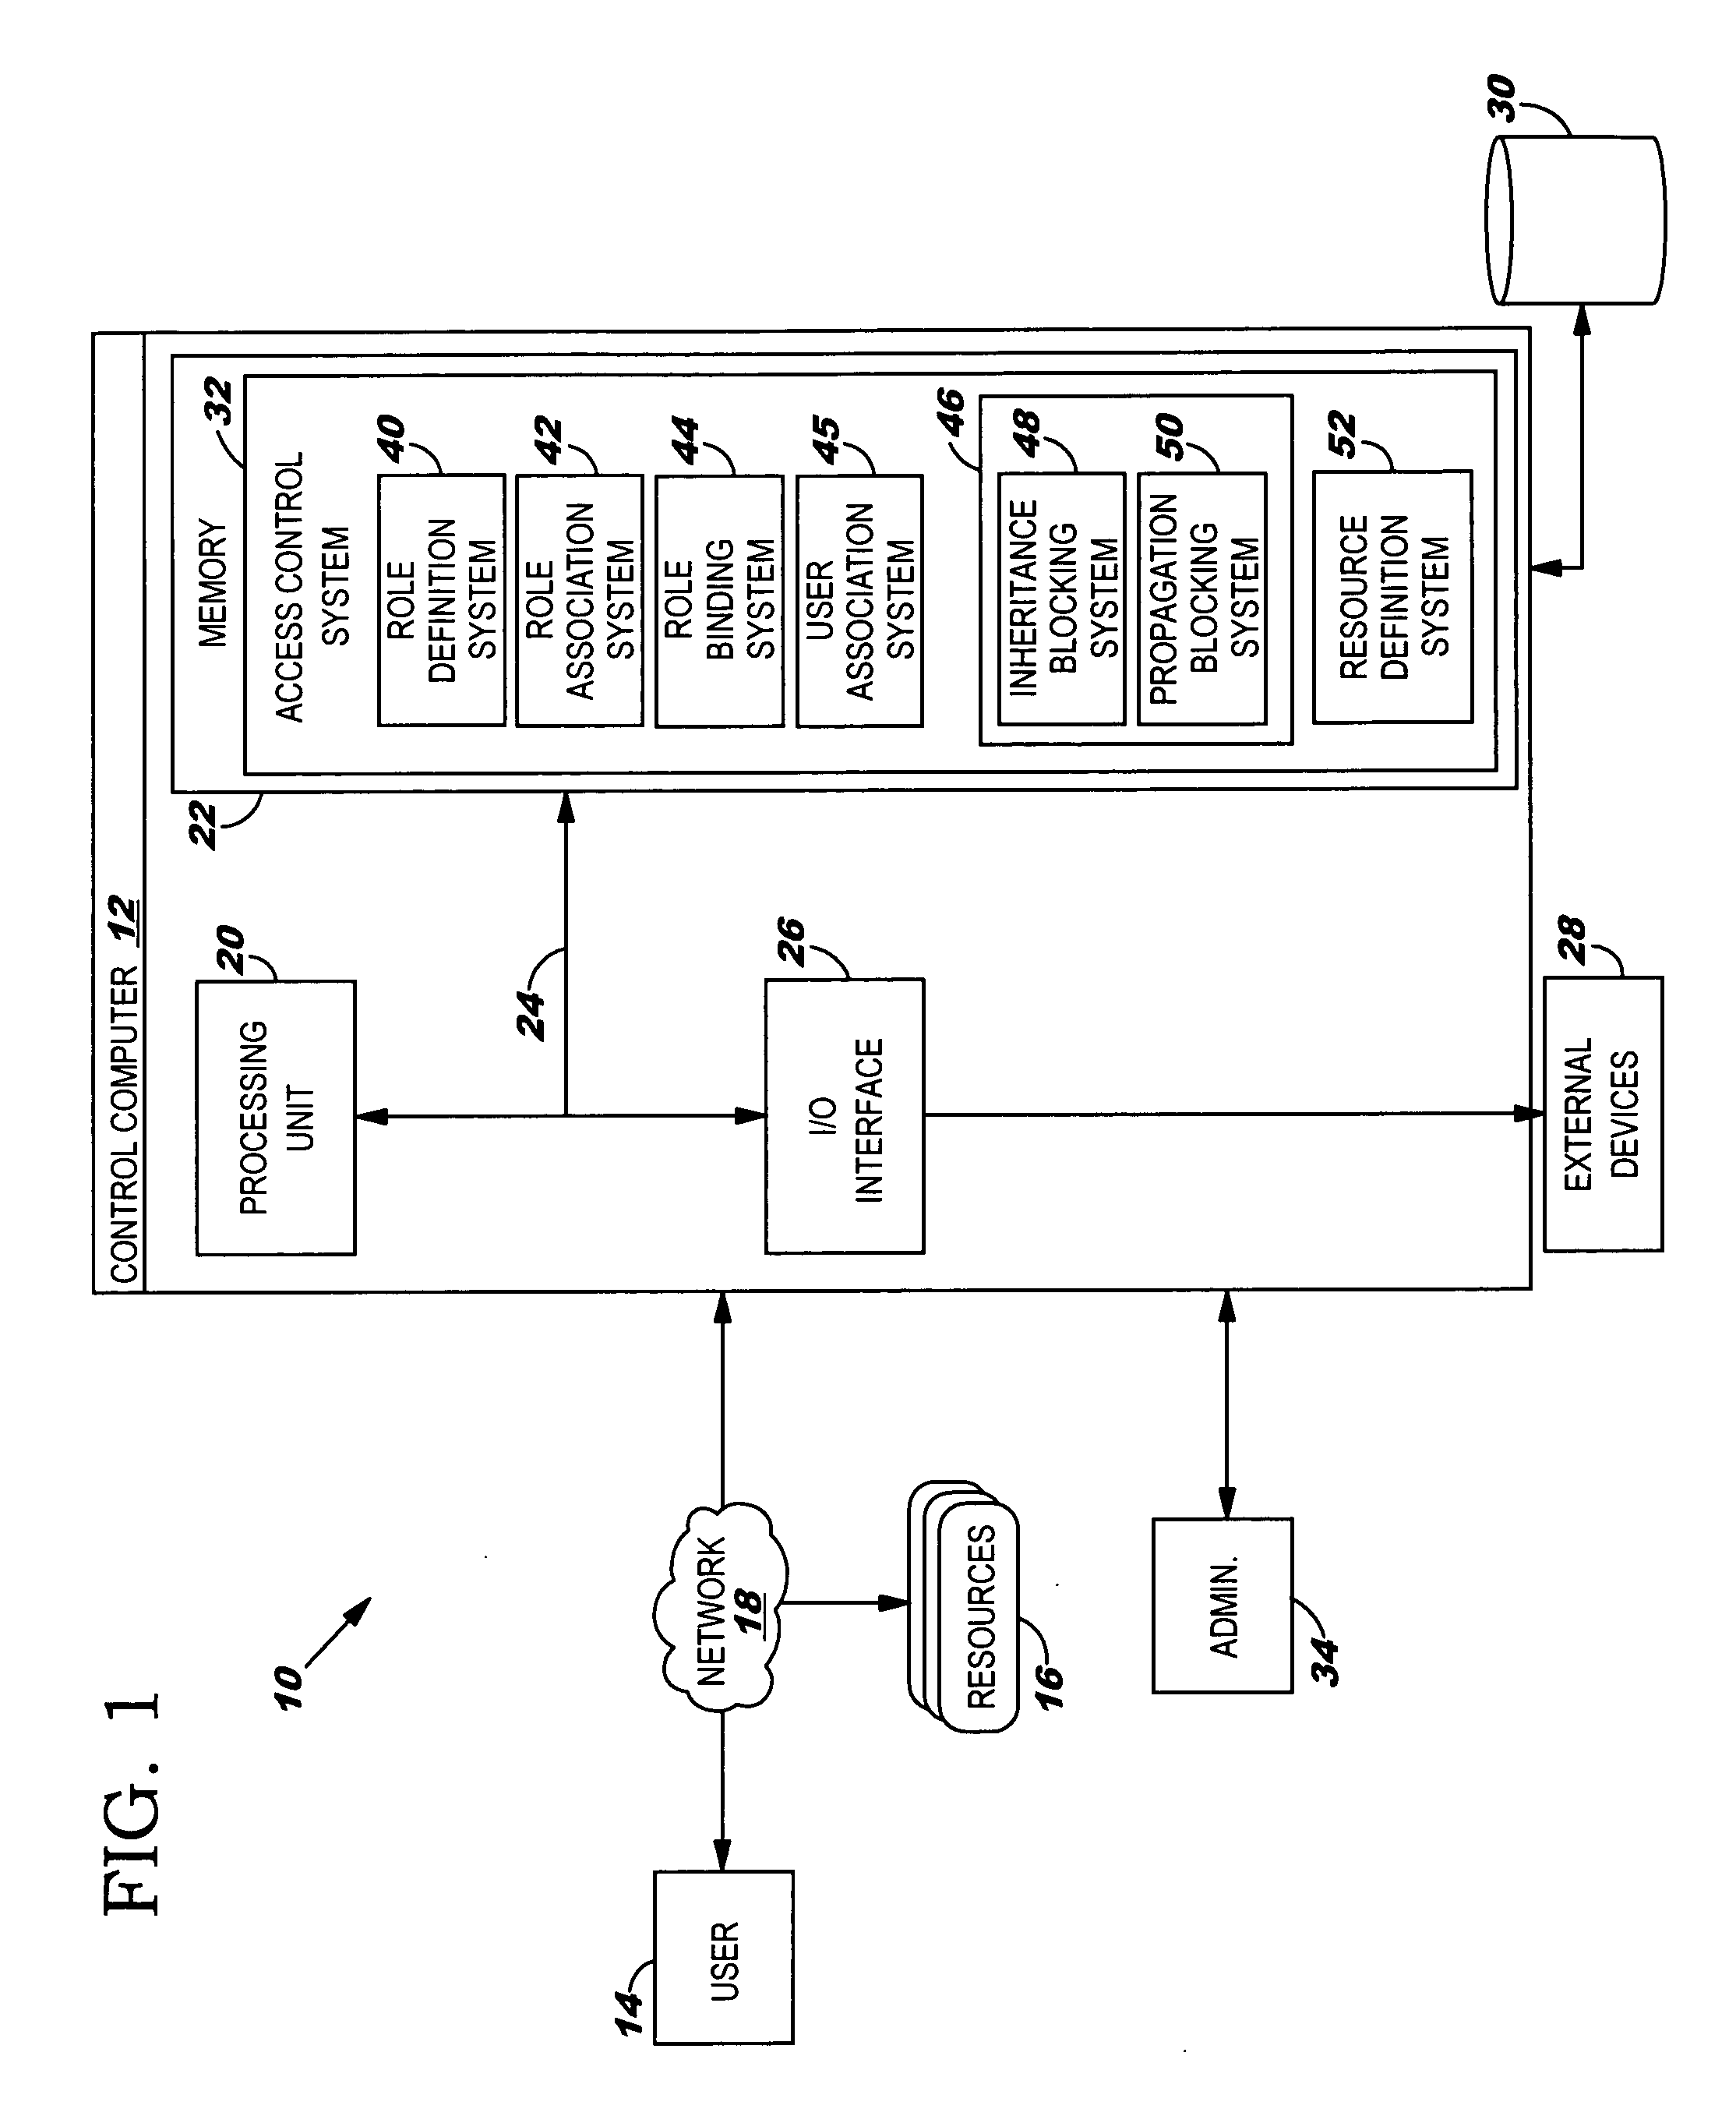 Inherited role-based access control system, method and program product